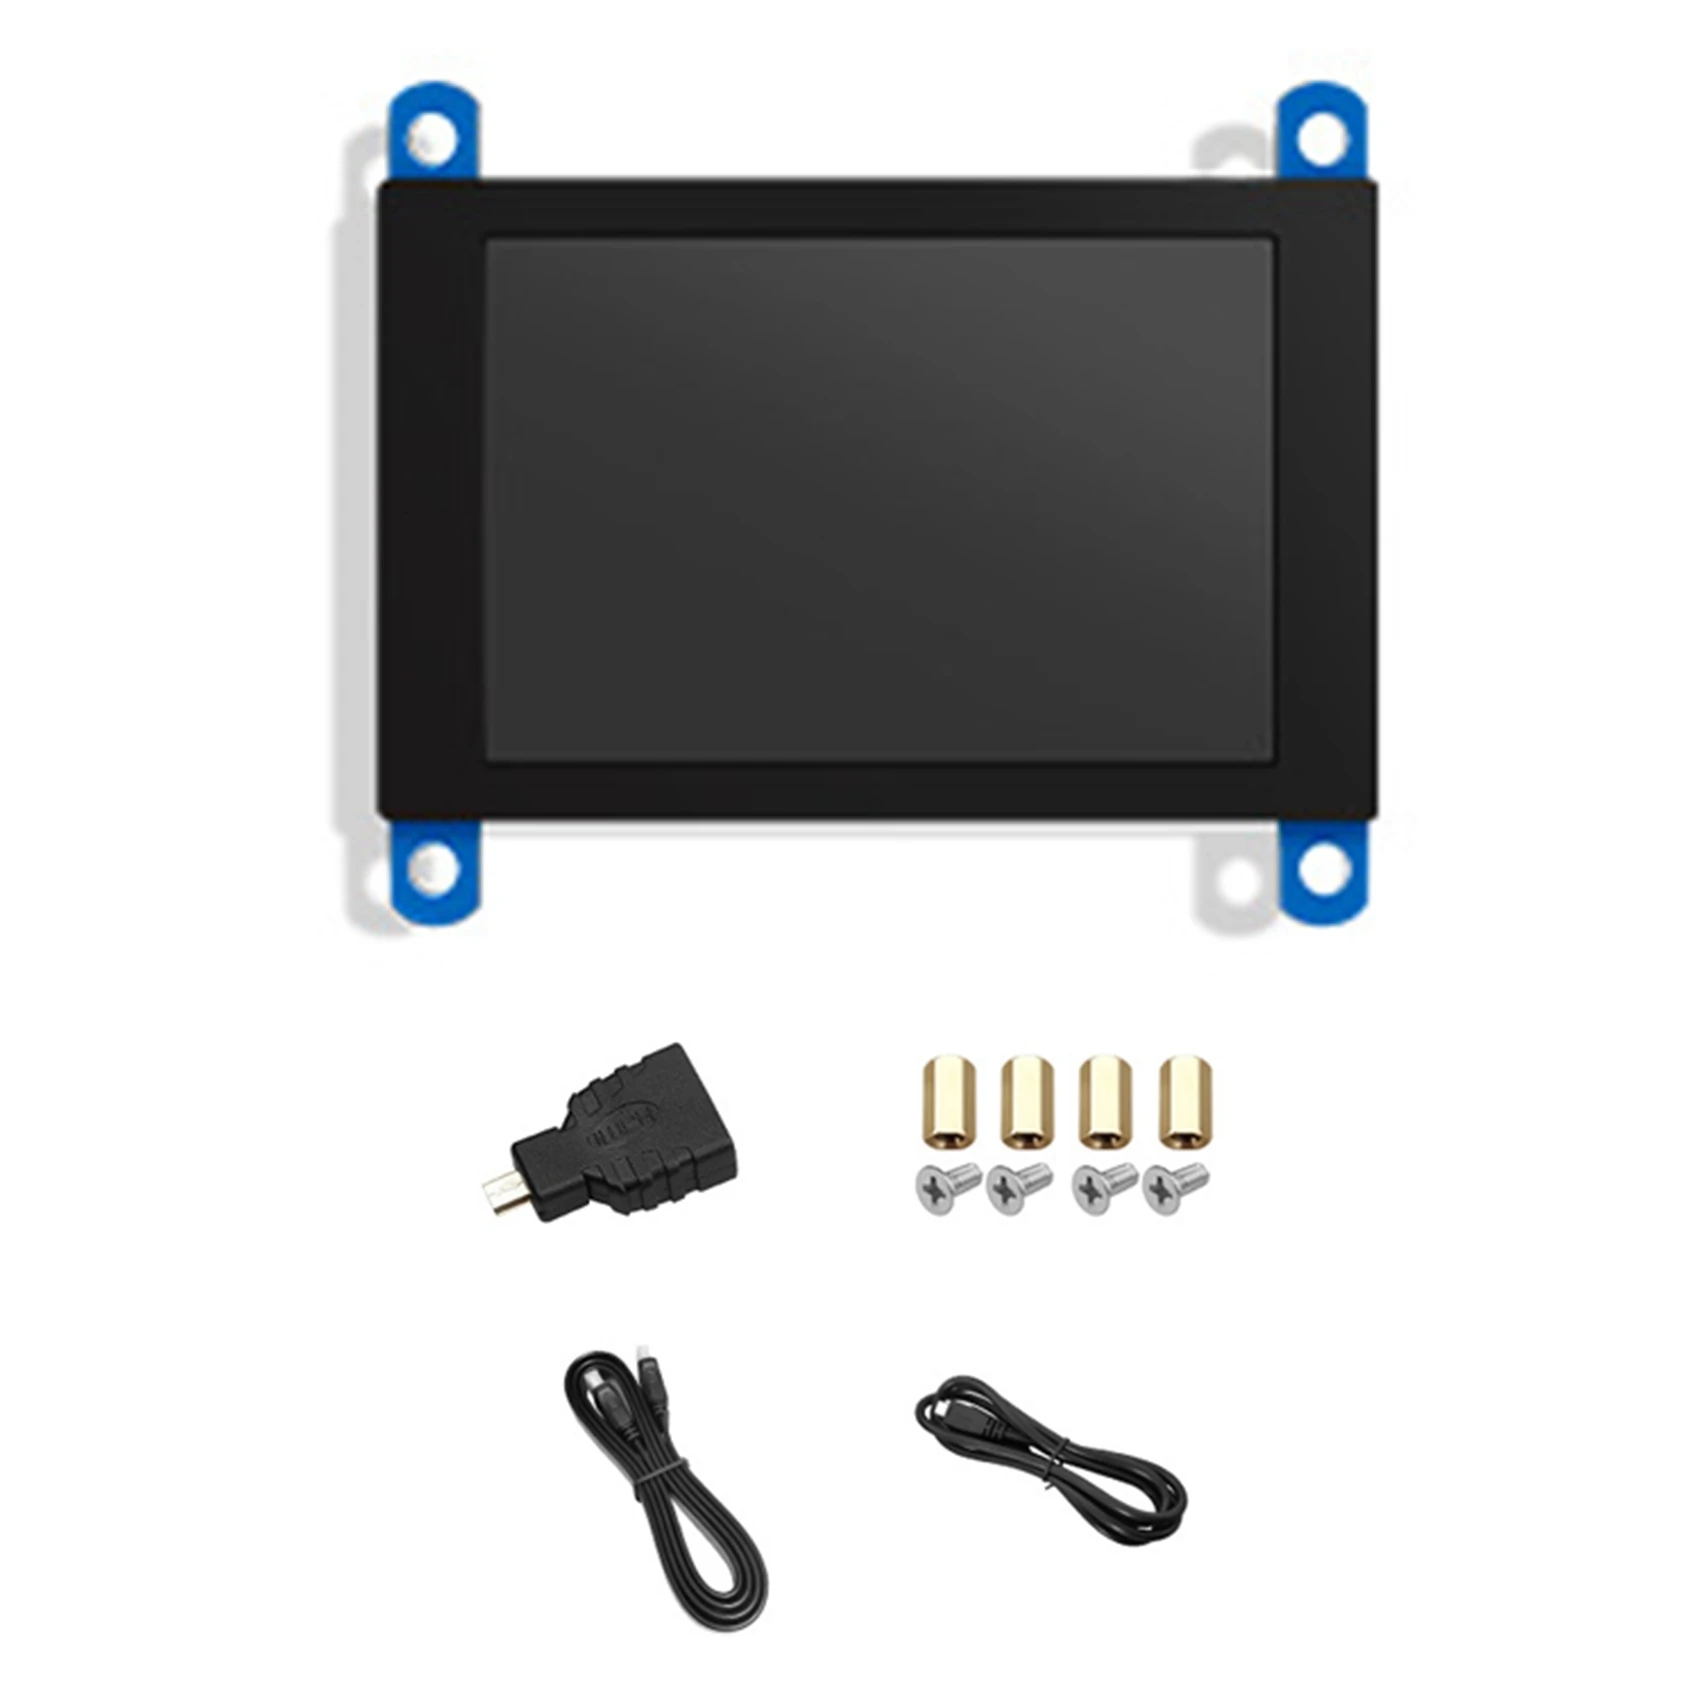 

3.5 Inch LCD Display HDMI-Compatible Independent Playback LCD Module with Touch Screen for Raspberry Pi